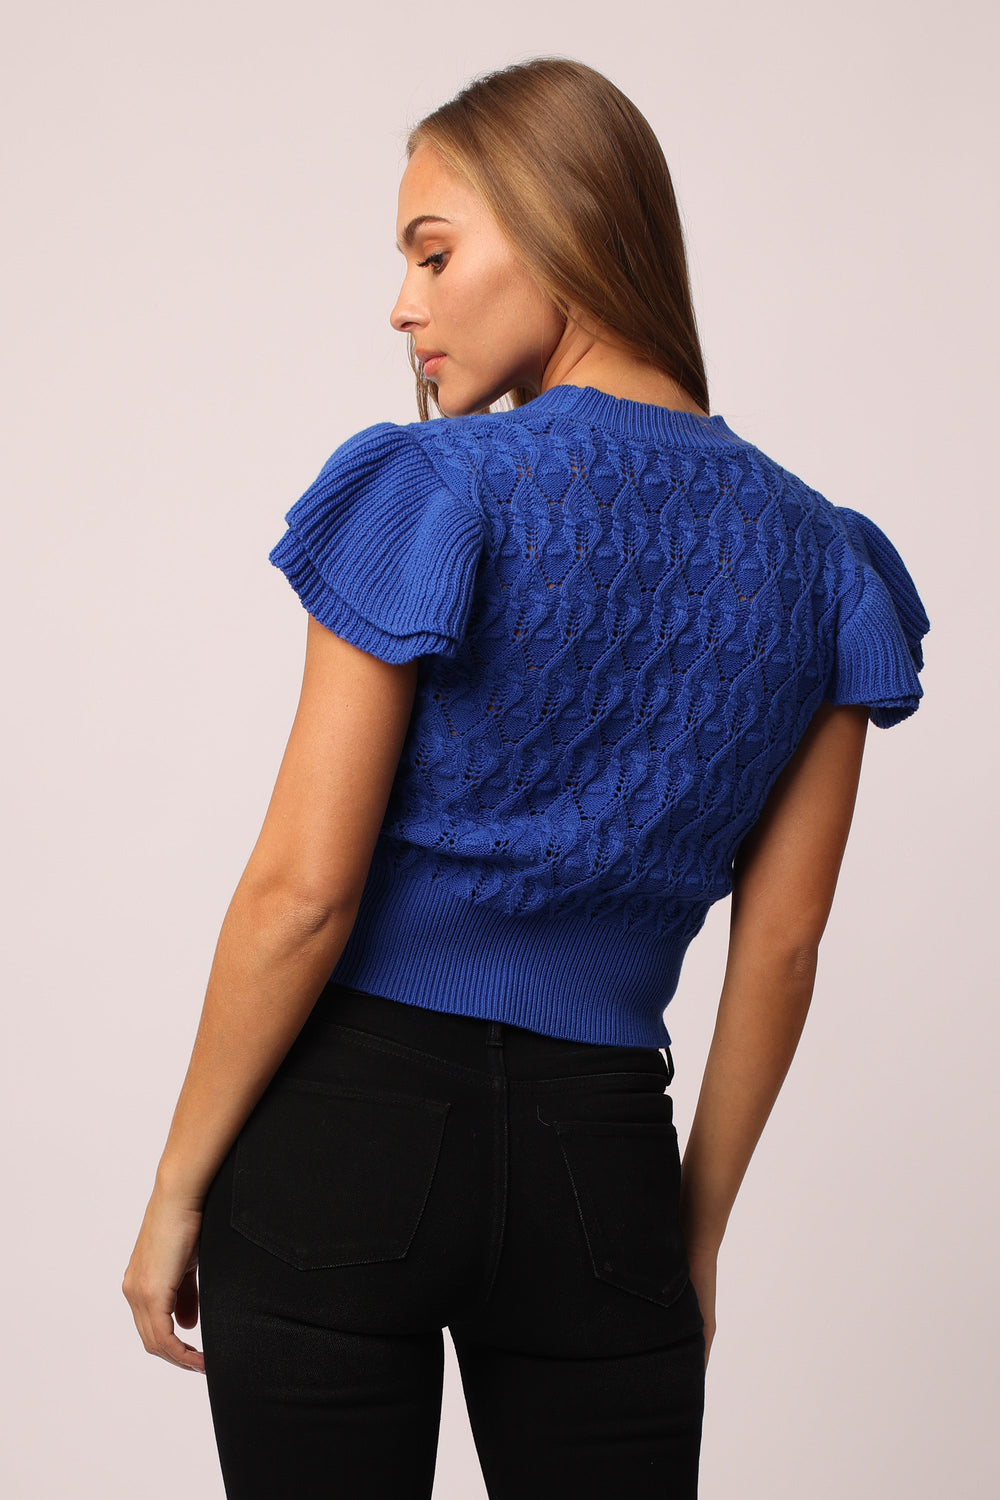 image of a female model wearing a MIRA SHORT SLEEVE SWEATER COBALT BLUE SWEATERS